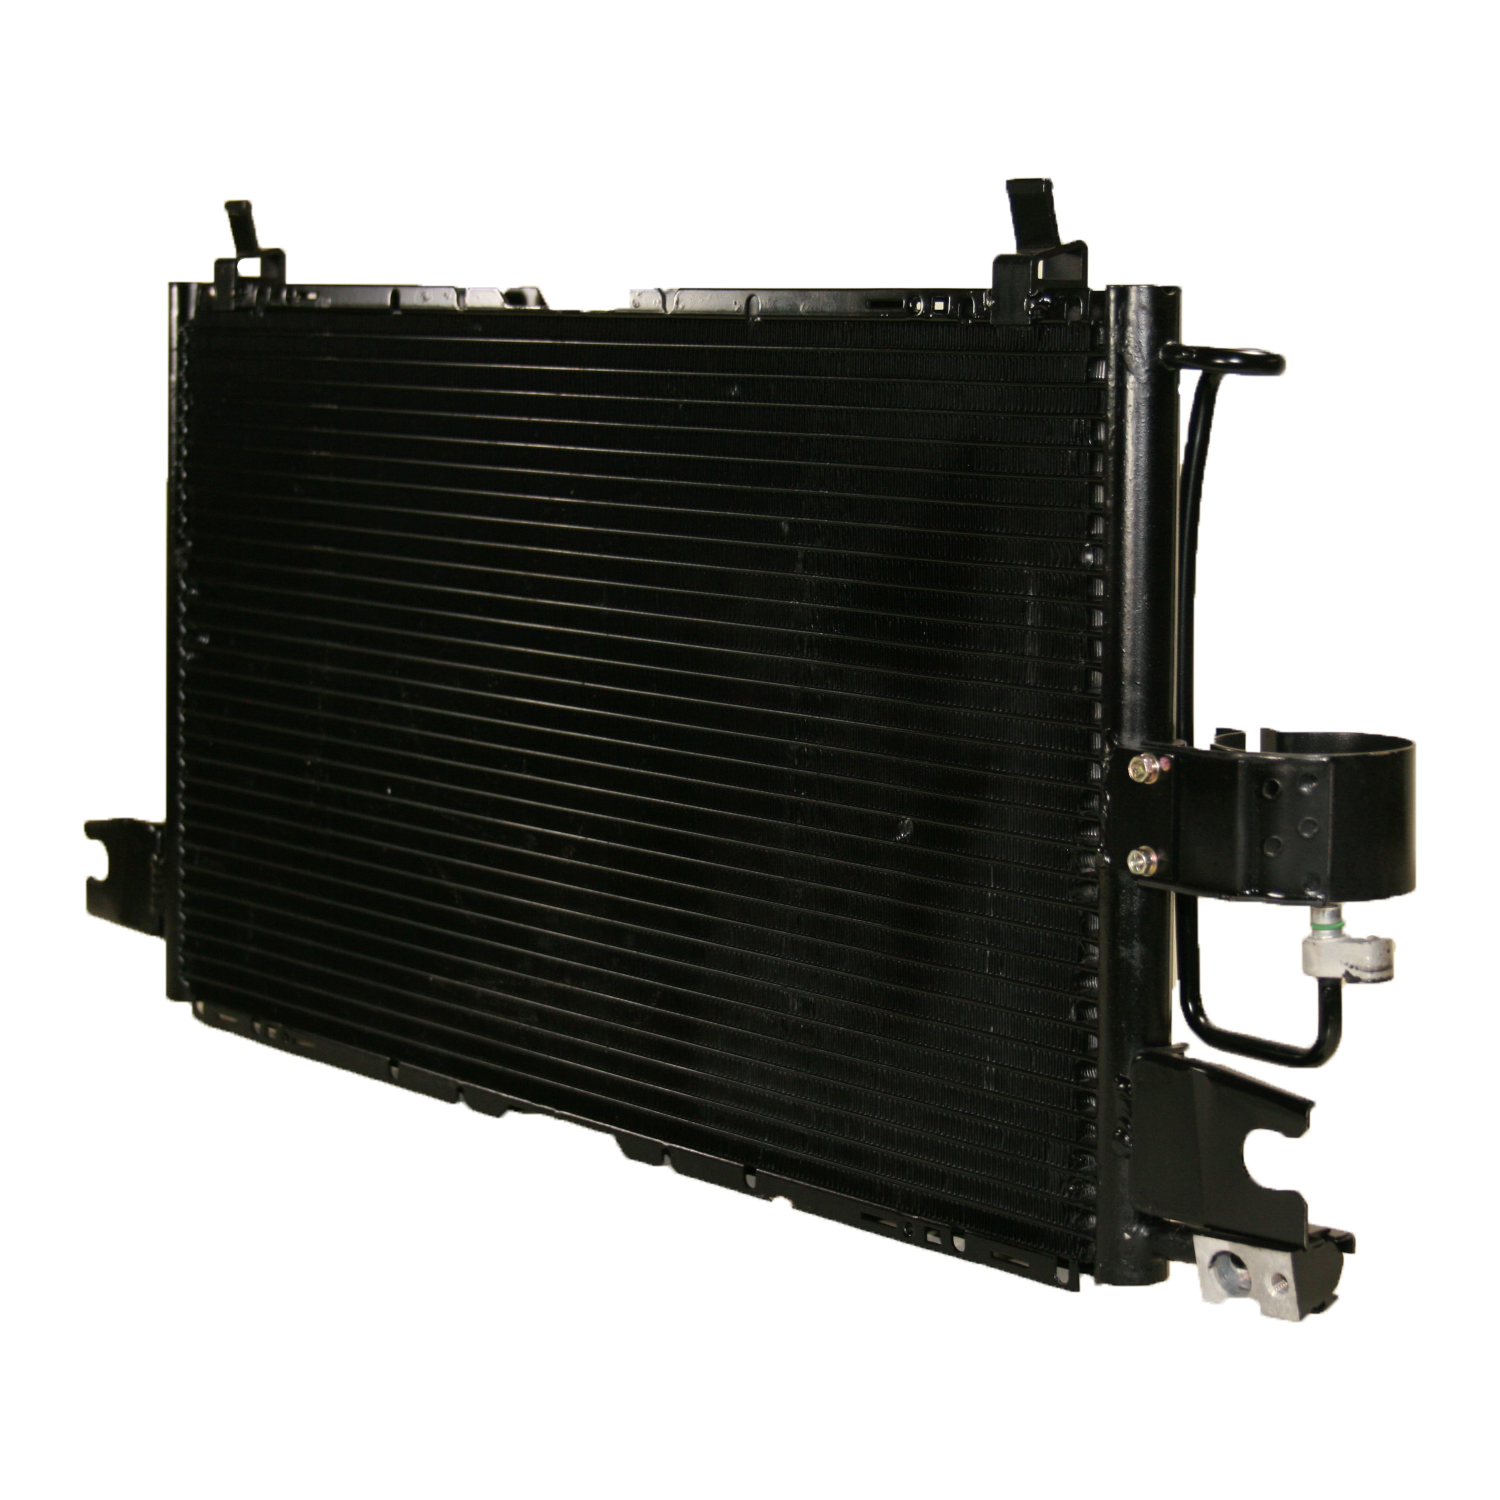 TCW Condenser 44-3005 New Product Image field_60b6a13a6e67c